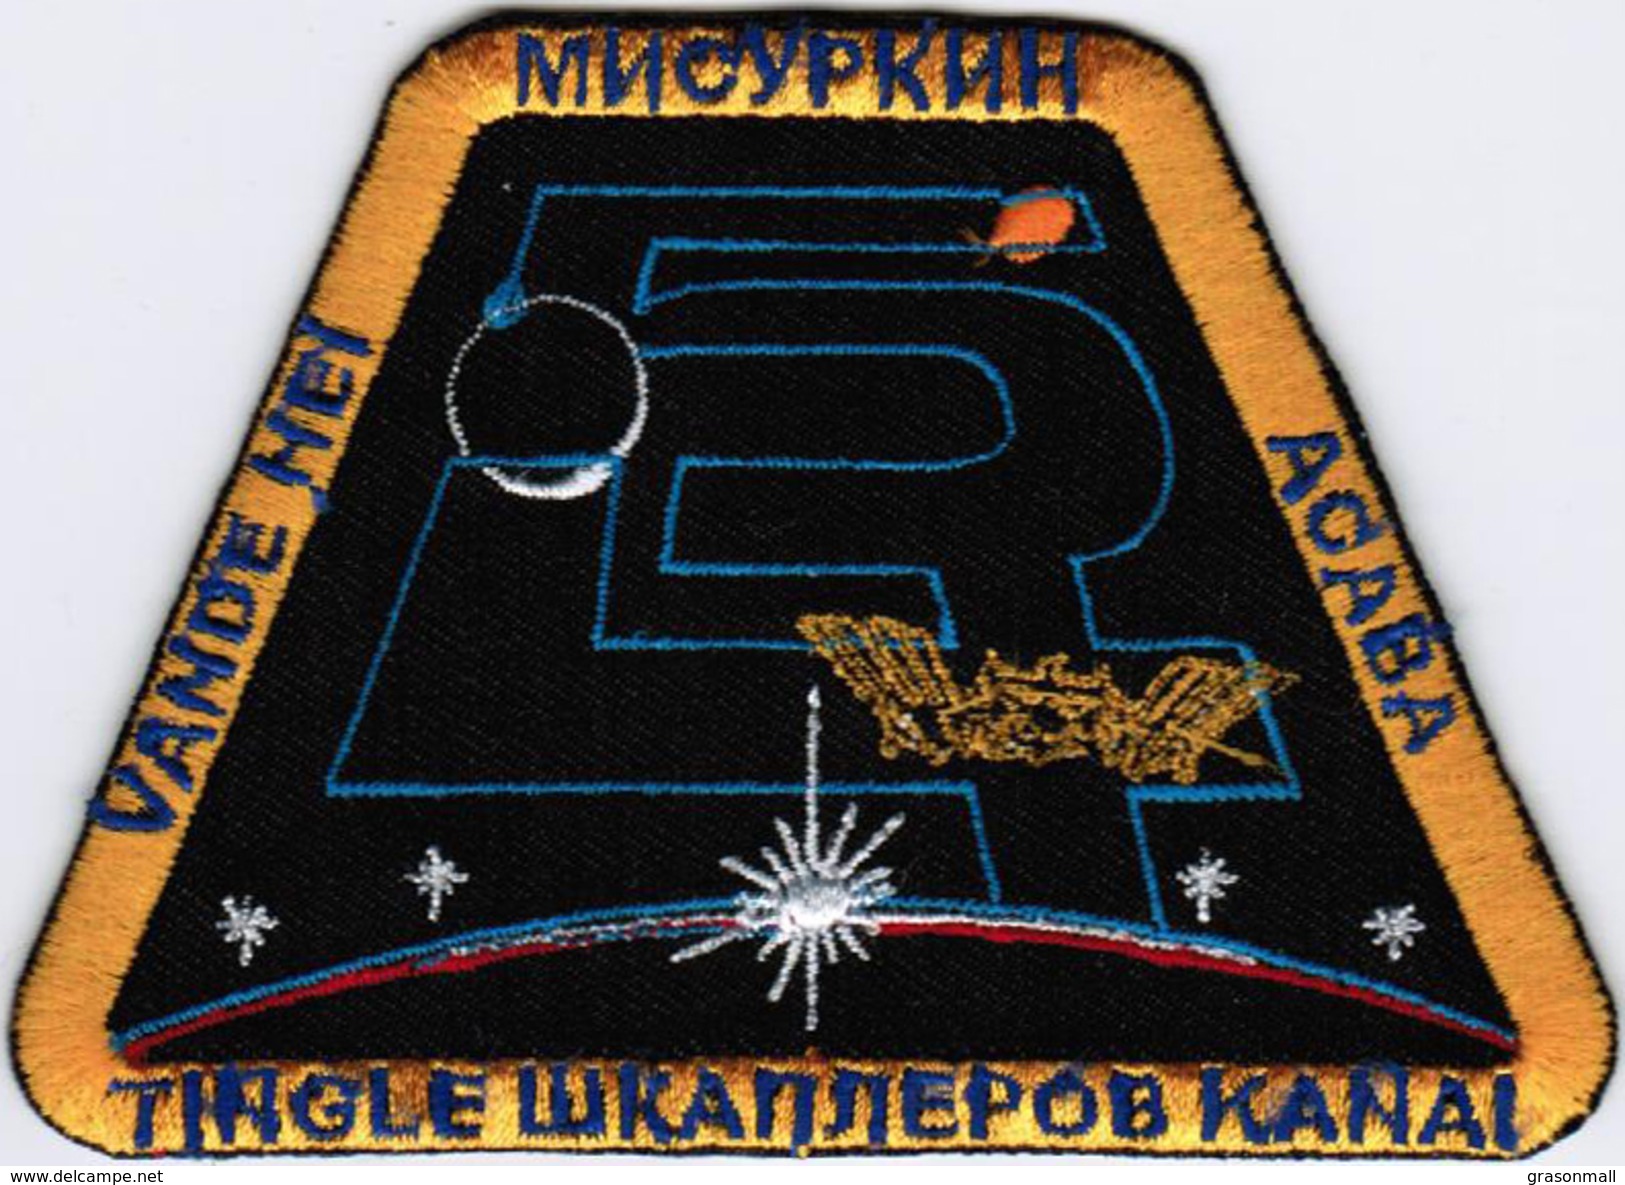 ISS Expedition 54 International Space Station Badge Iron On Embroidered Patch - Patches